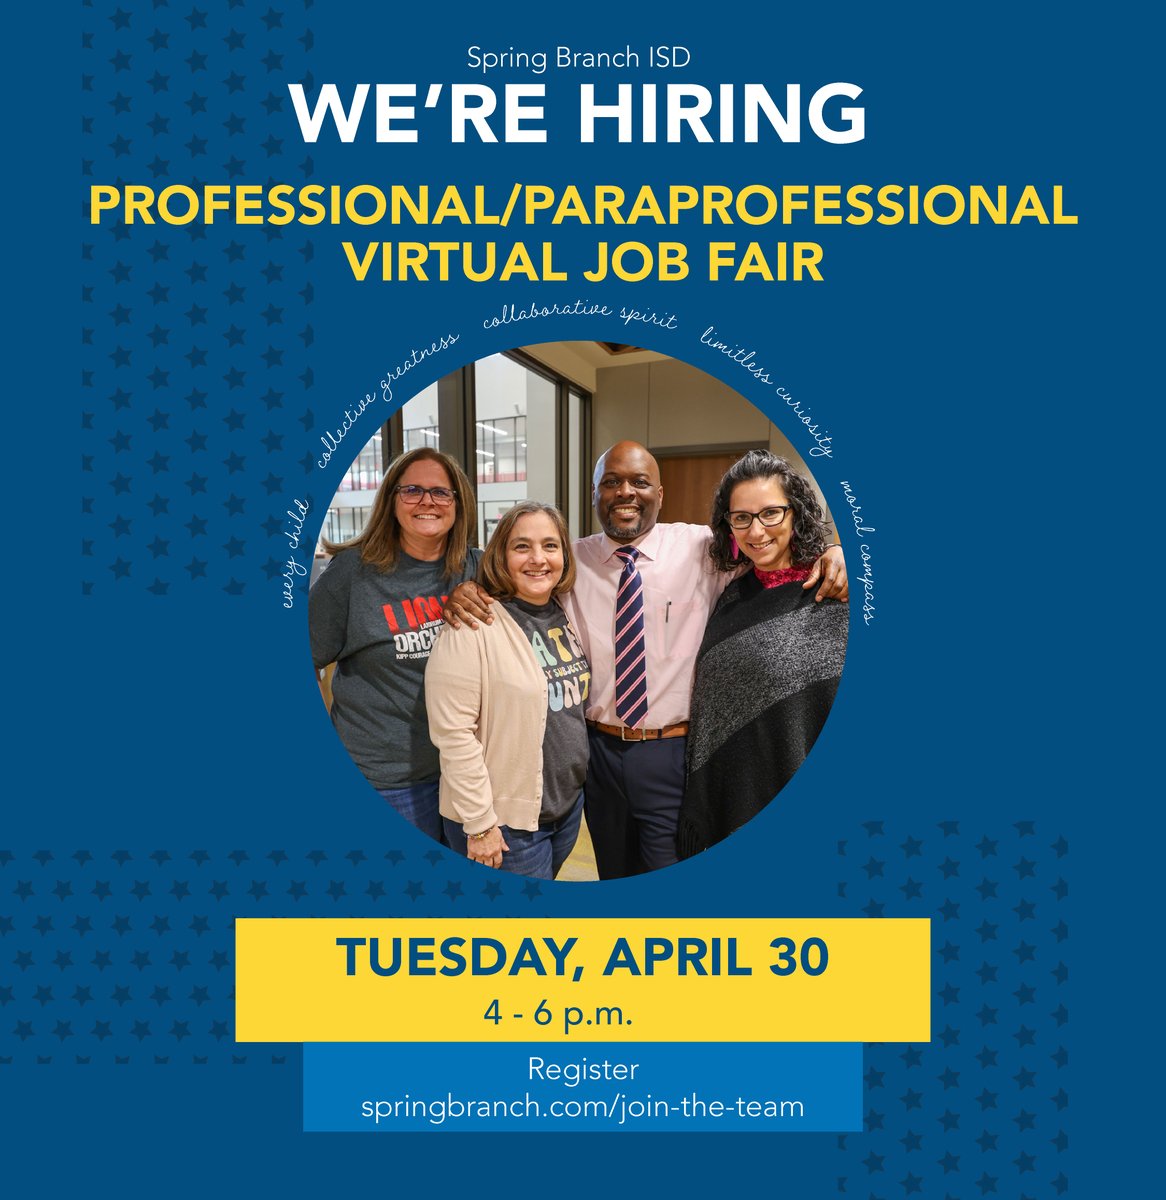 Join @sbisdhr for a Virtual Bilingual Teacher Job Fair on Tuesday, April 30 at 4 p.m. Learn more and register 📲 springbranchisd.com/join-our-team